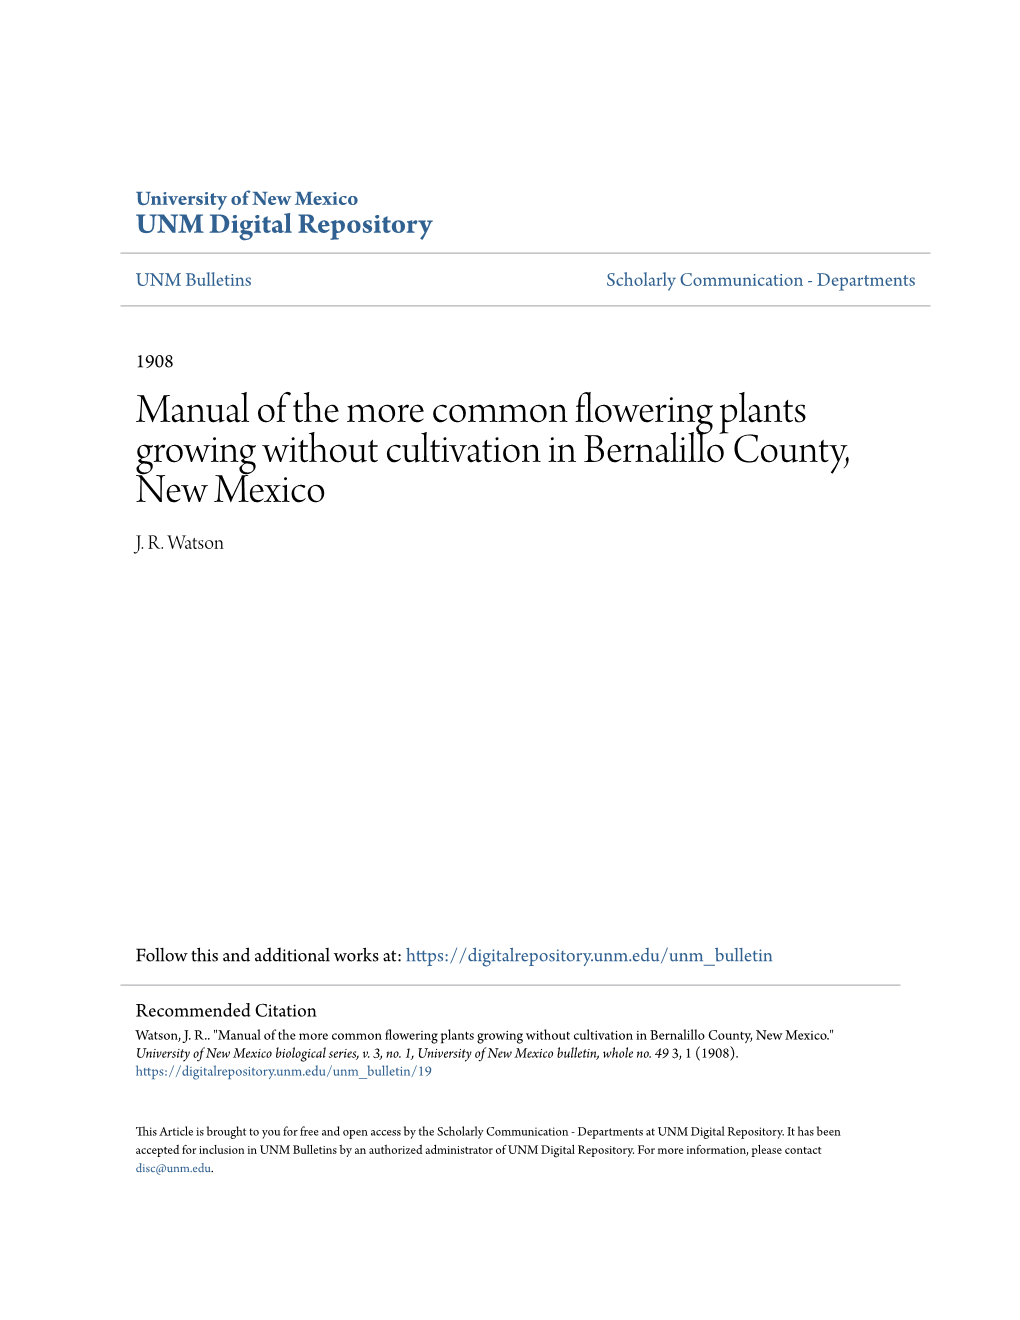 Manual of the More Common Flowering Plants Growing Without Cultivation in Bernalillo County, New Mexico J